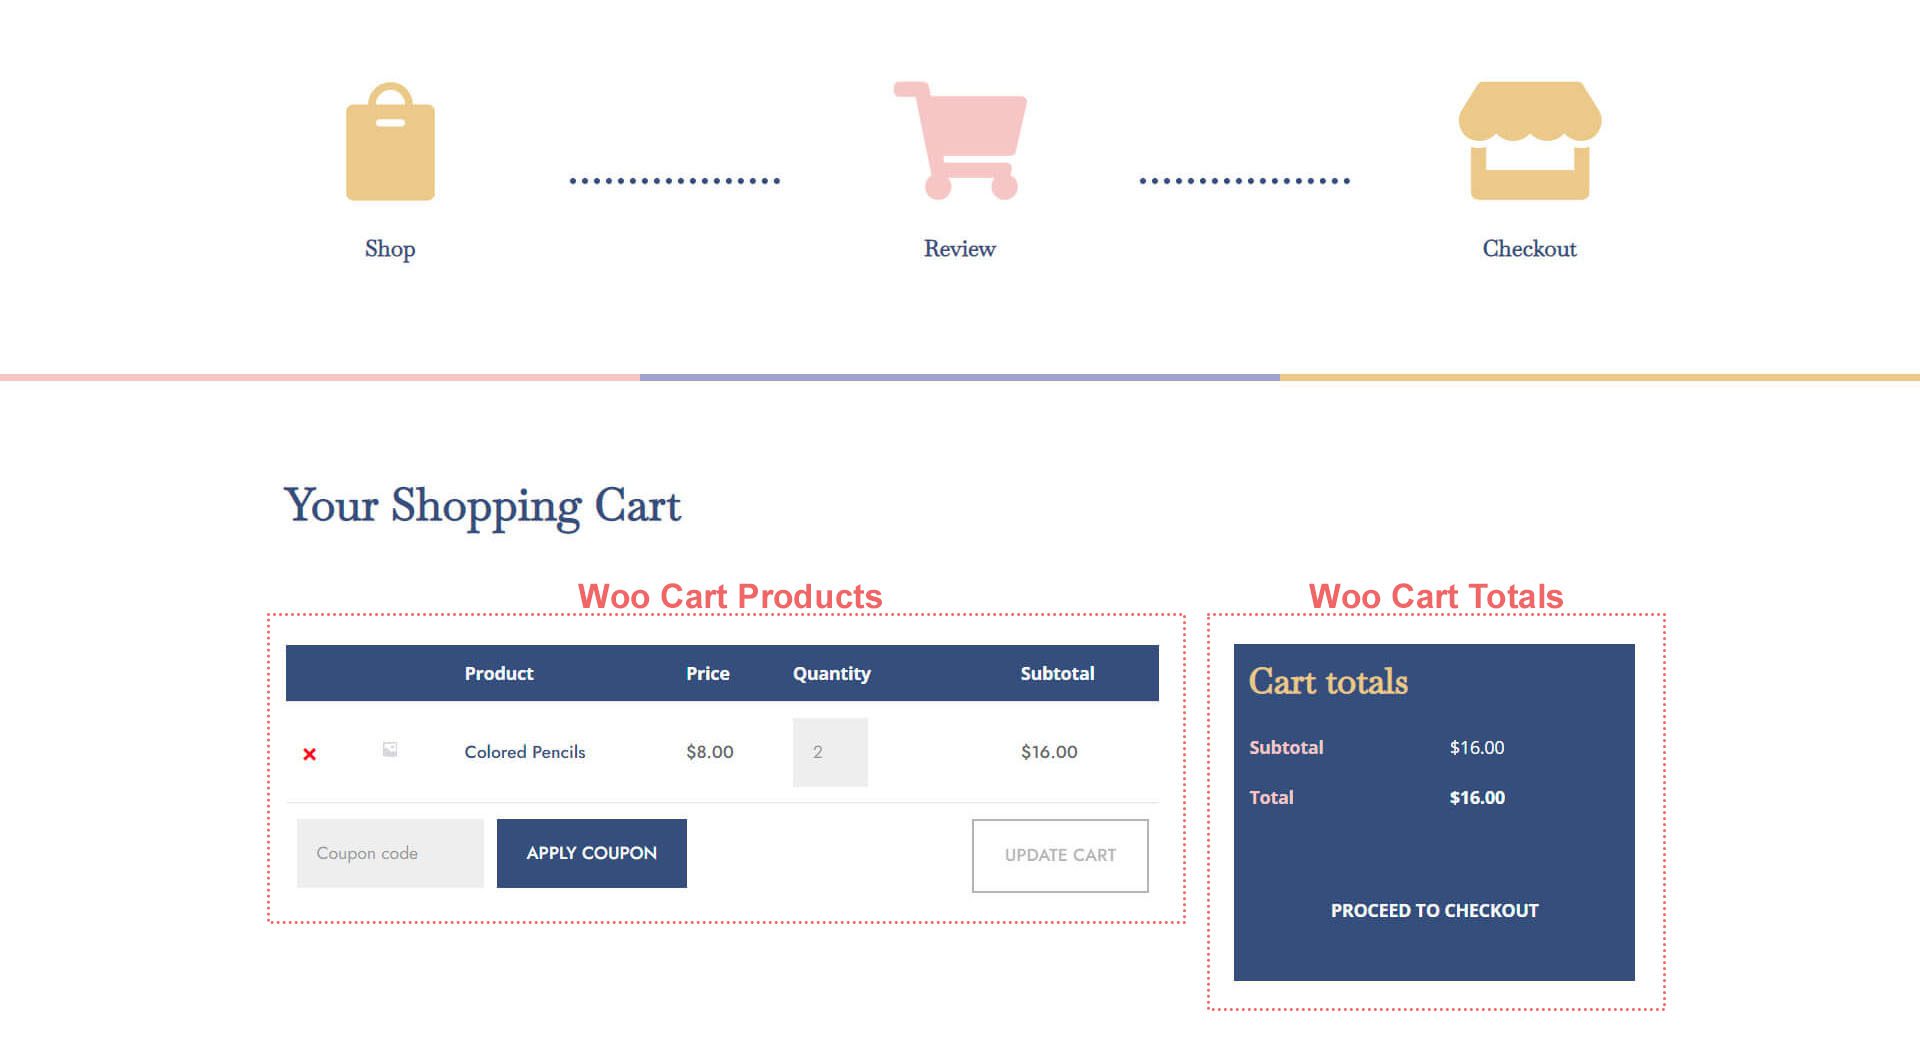 Overview of the cart pages with the other Woo modules